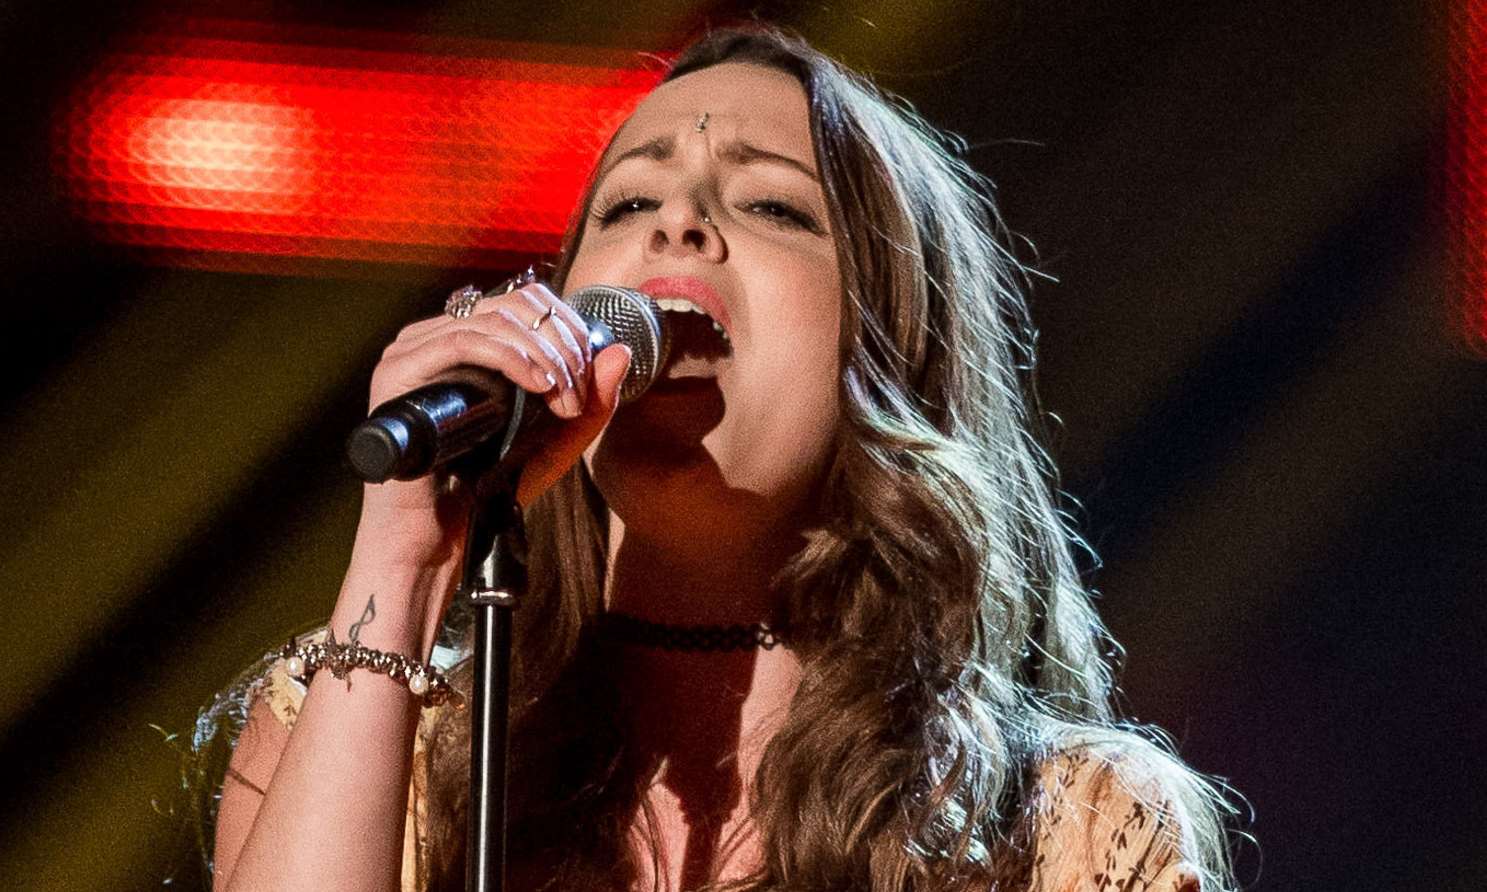 Hannah performing on The Voice.